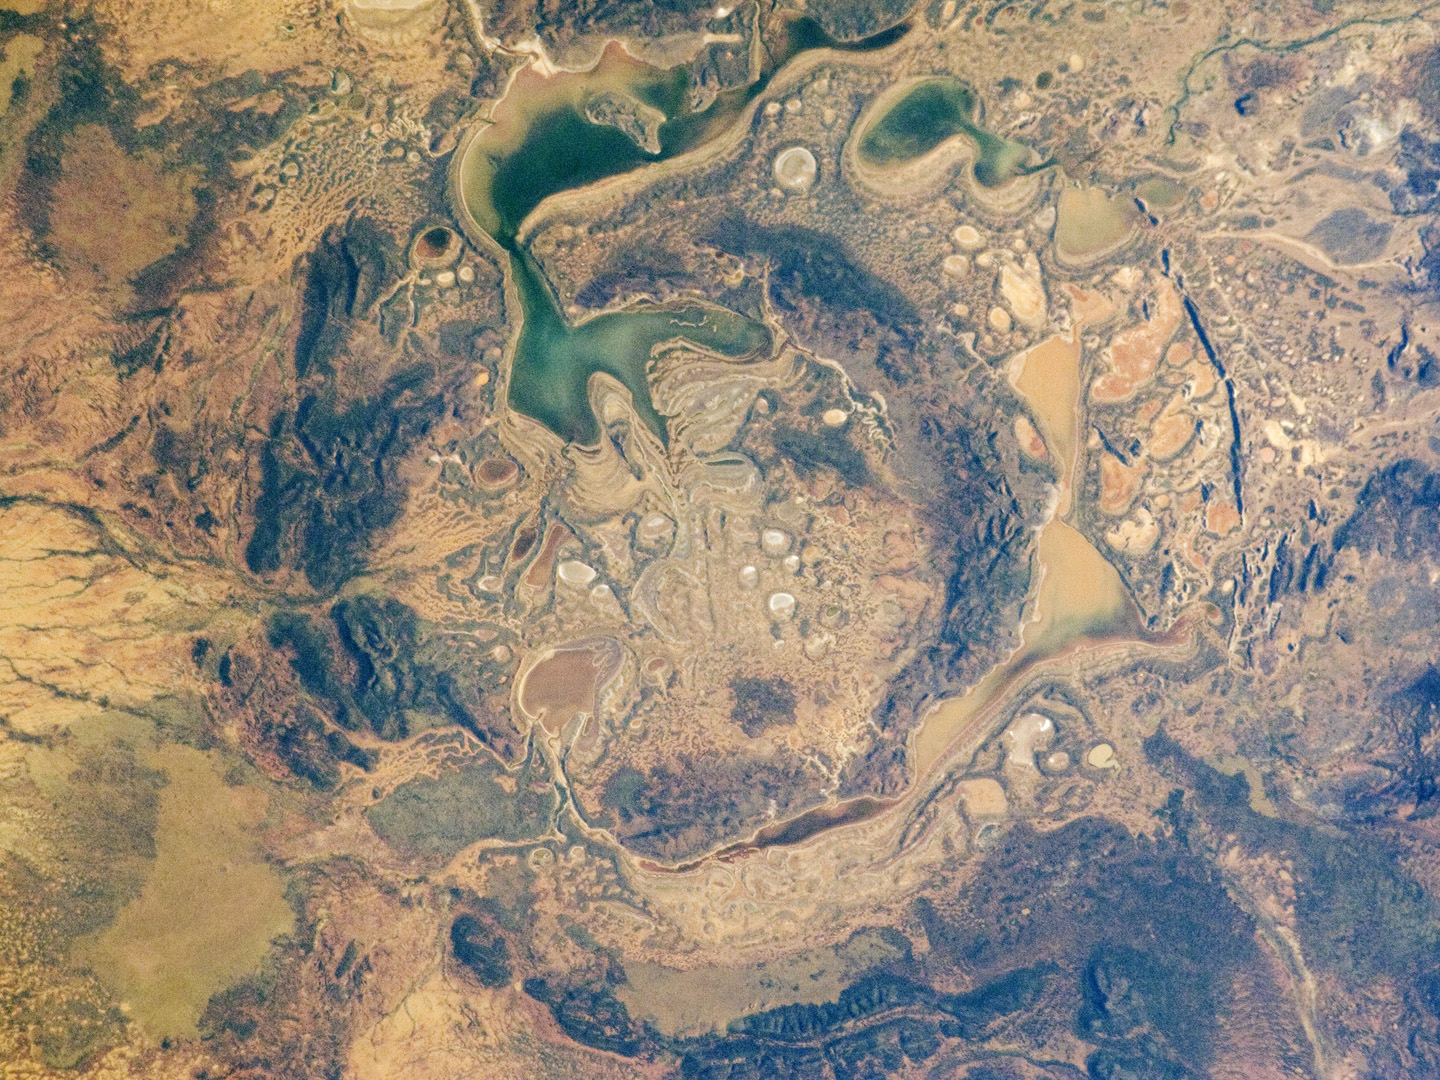 Shoemaker Impact Structure, Western Australia - related image preview